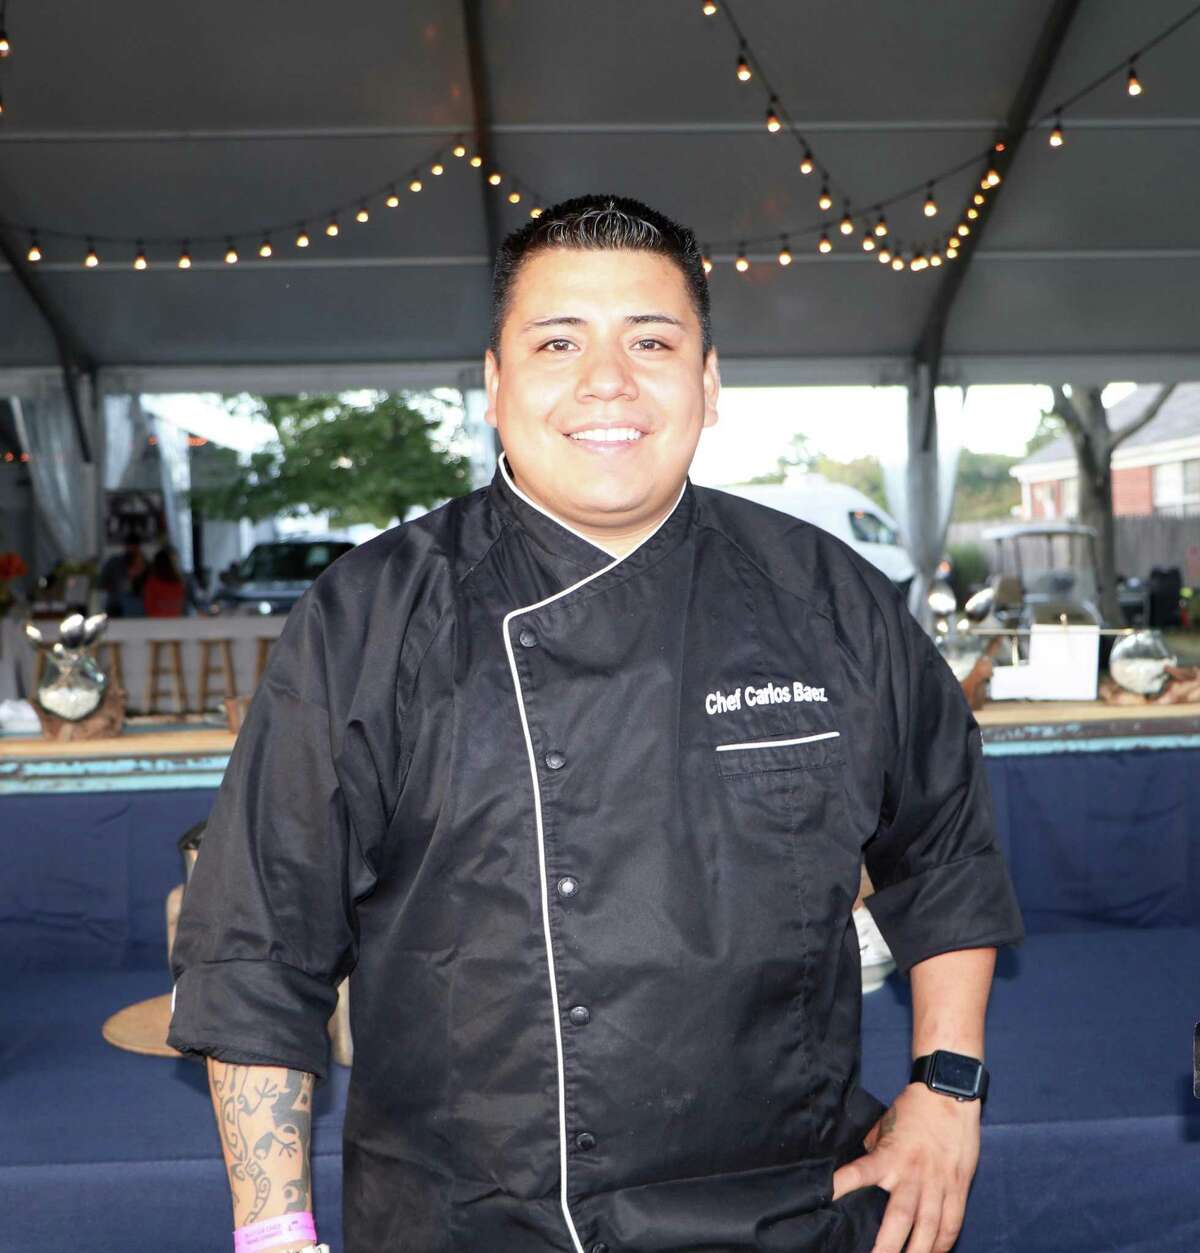 Executive chef Carlos Baez, of The Spread and El Segundo restaurants in Norwalk, has been at the helm of the former for five years.